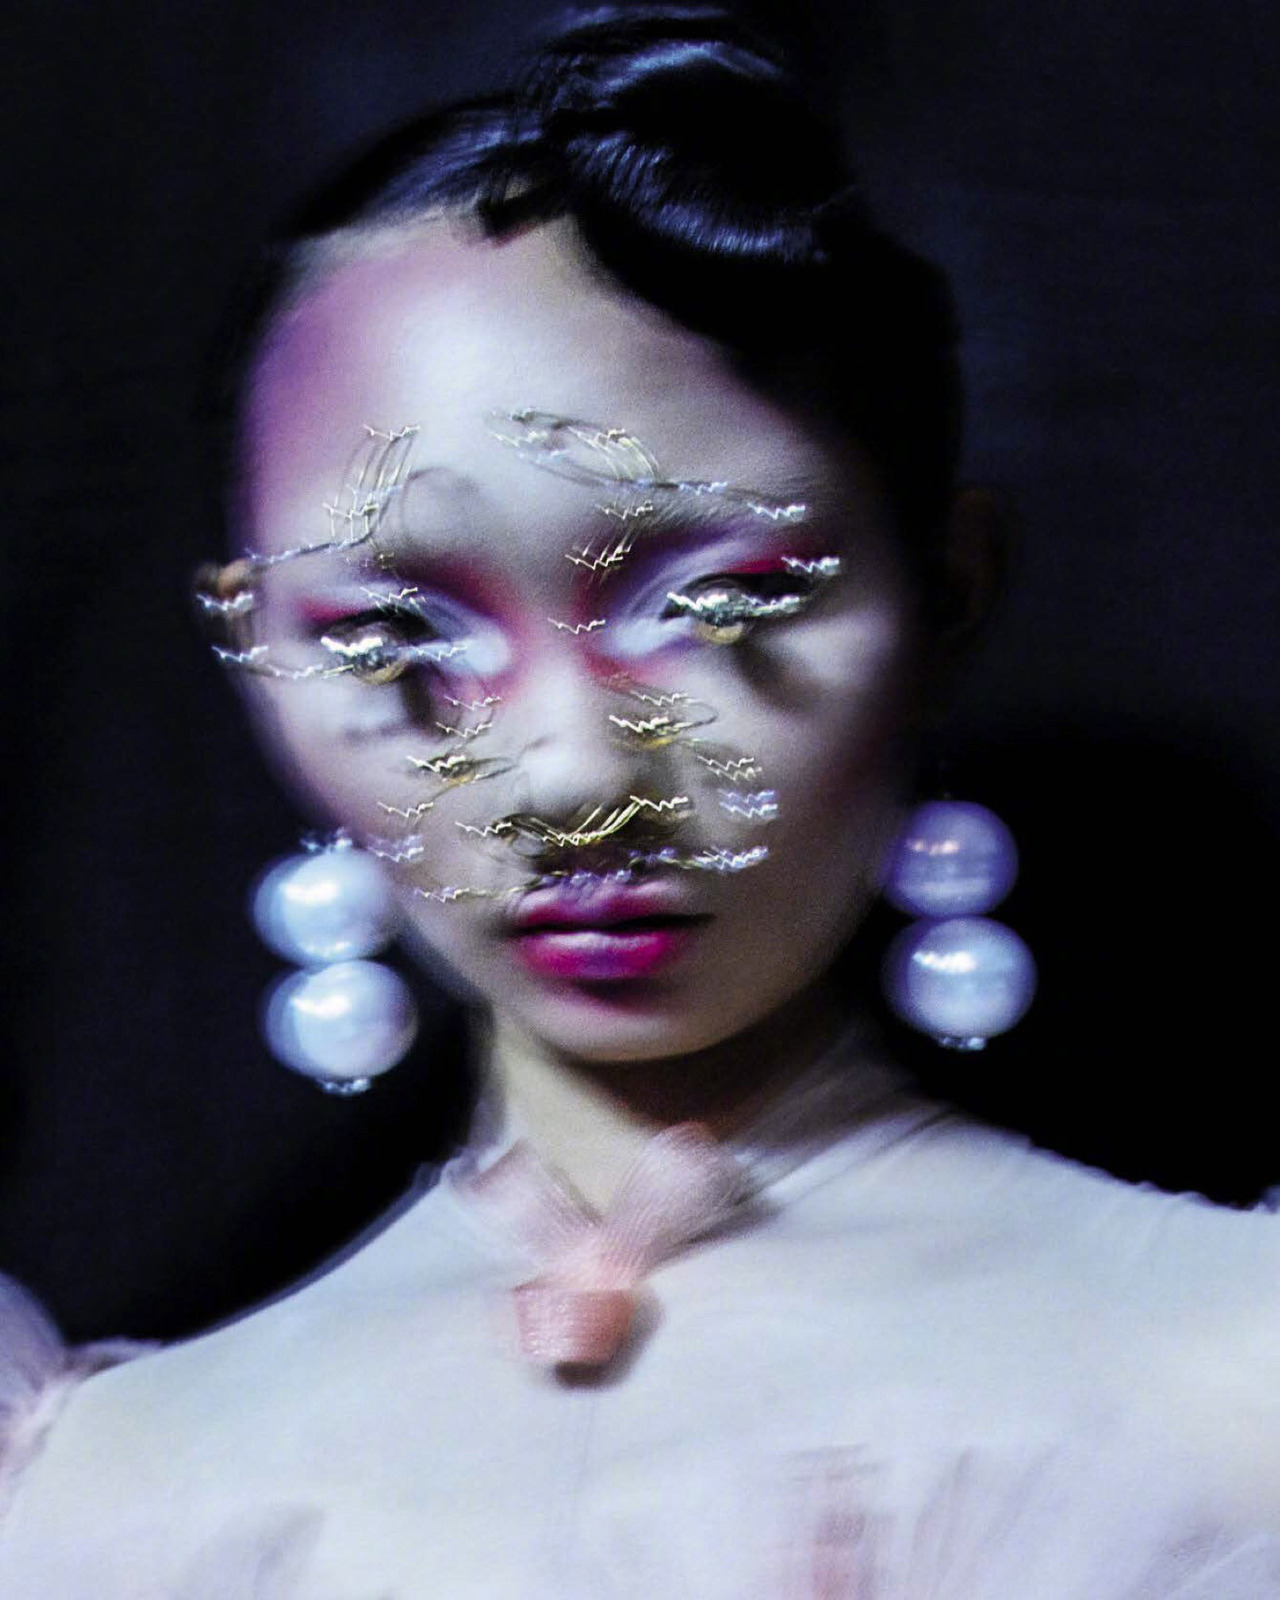 worldwidefashion:  ‘Chasing the Dragon’ Ling Ling Chen by Tim Walker for VOGUE